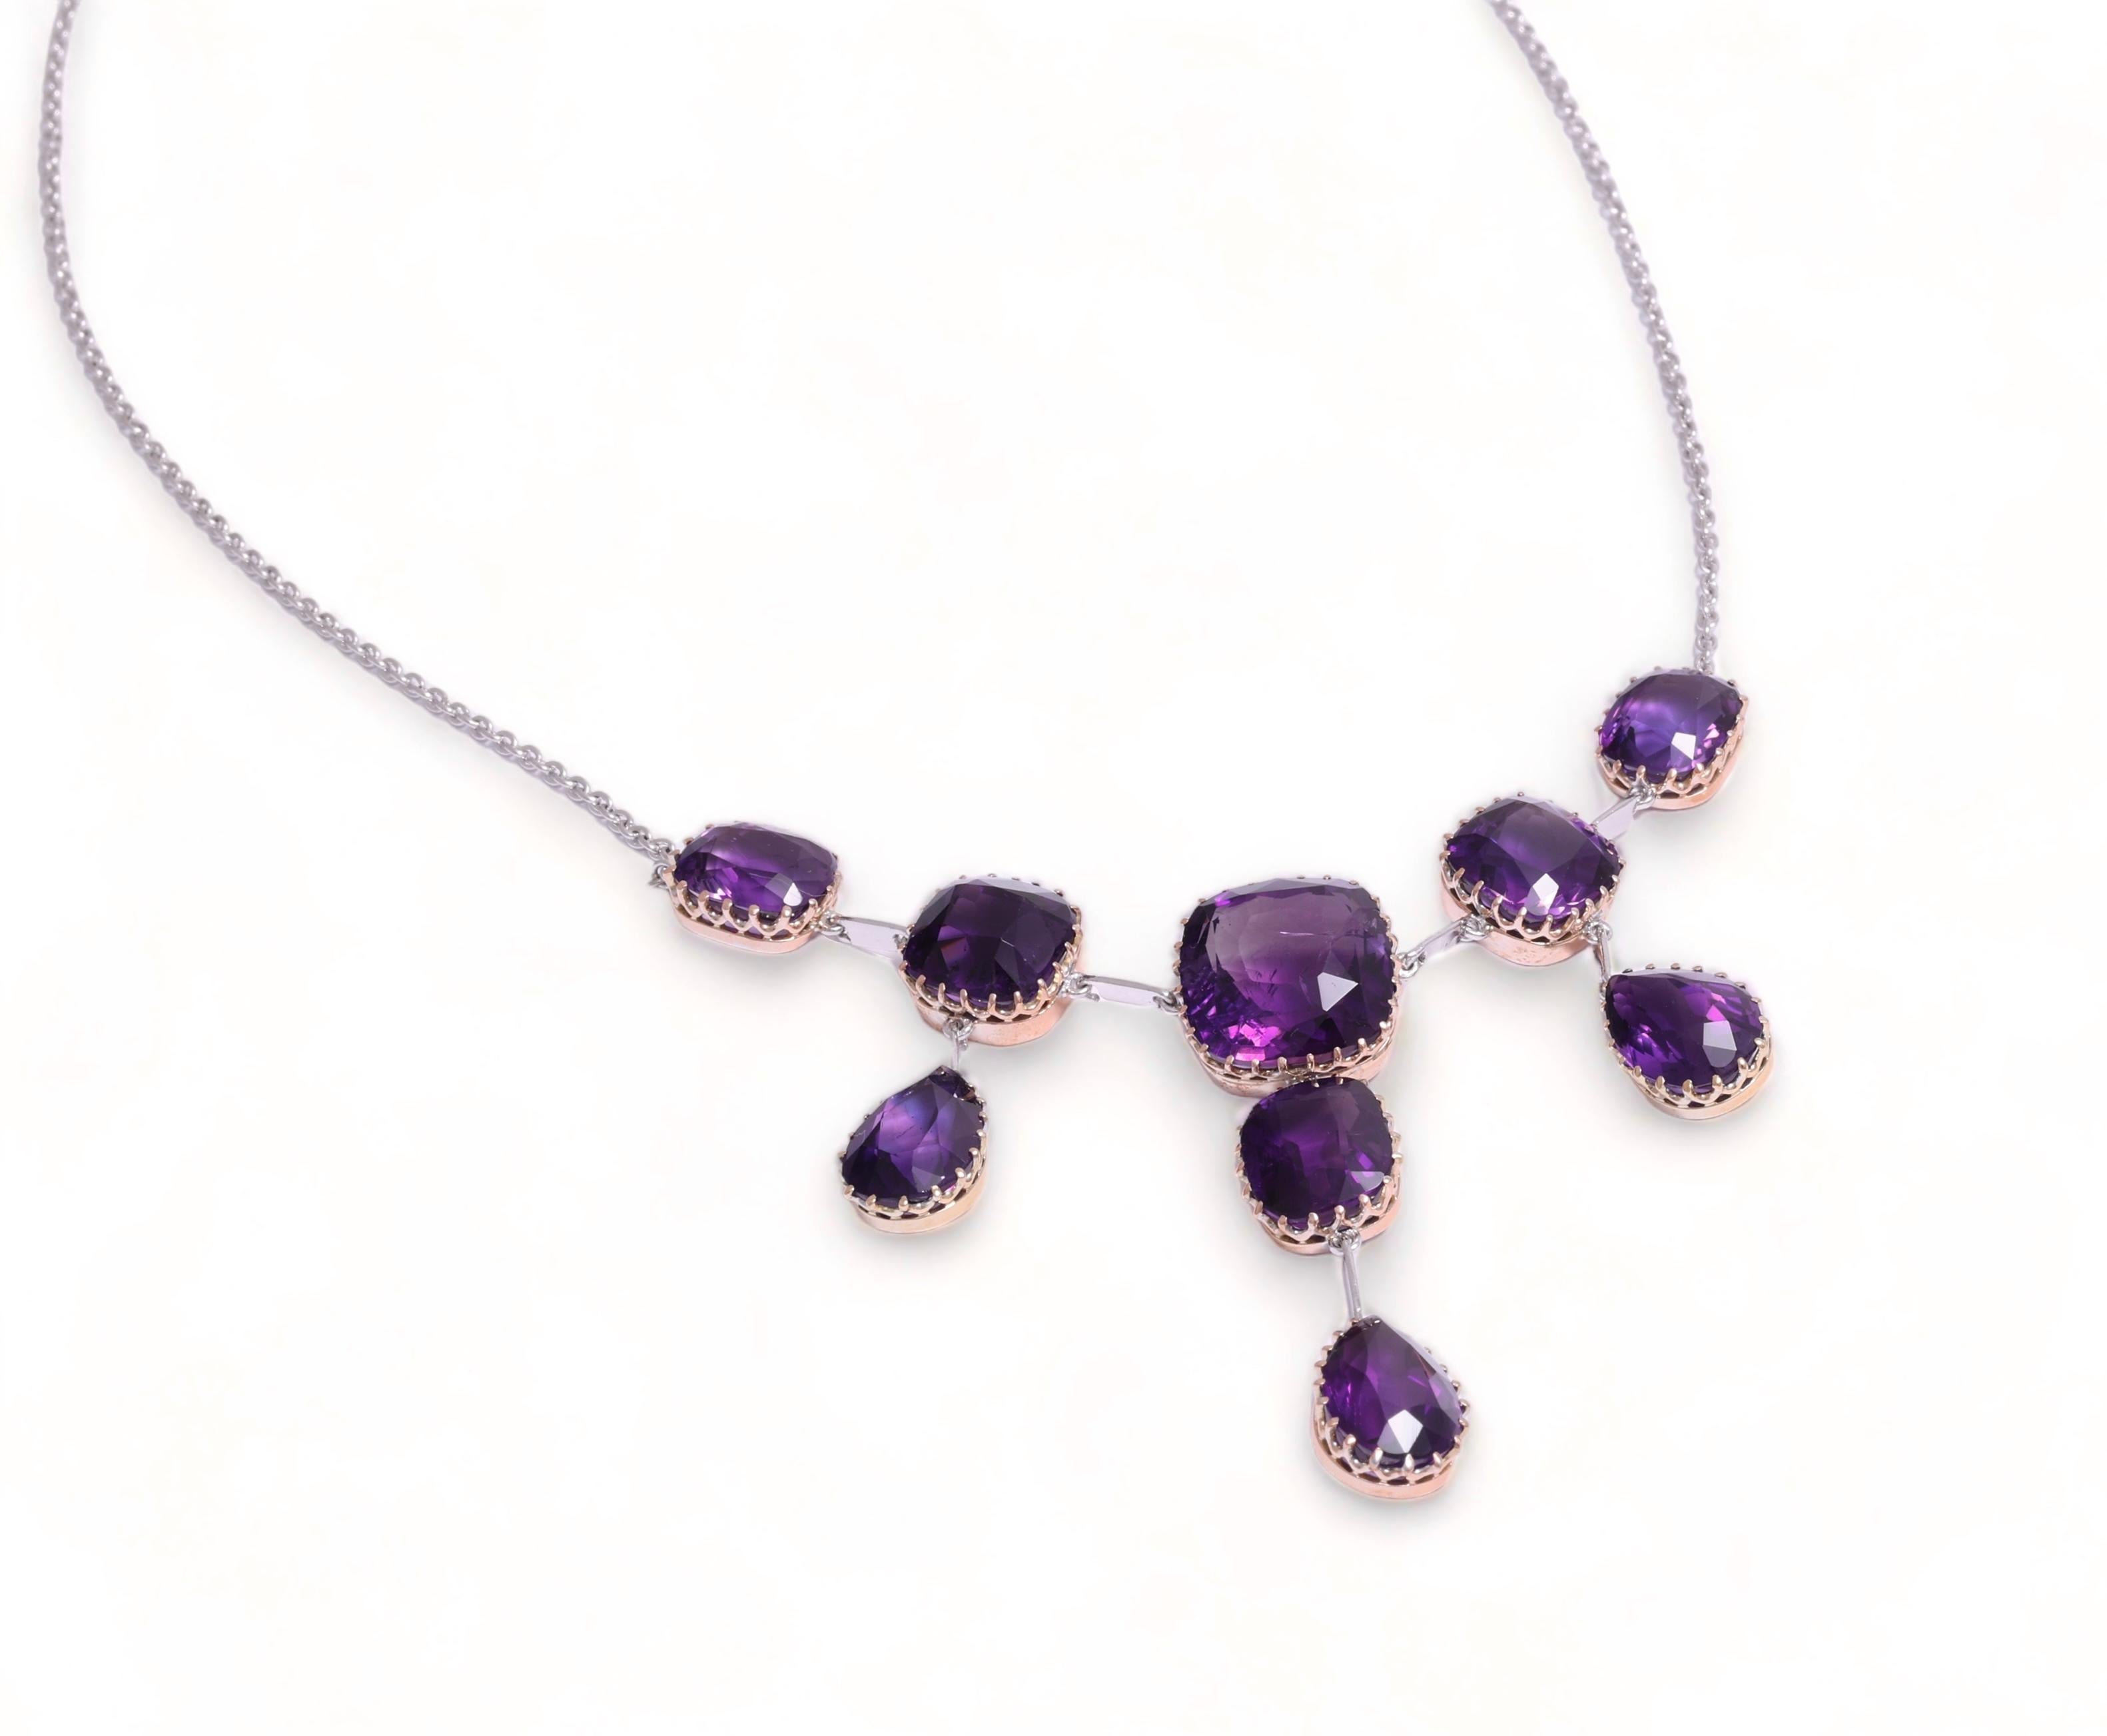 Gorgeous Platinum / Gold Chandelier Drop Necklace With 55 ct. Amethyst Gemstones For Sale 3